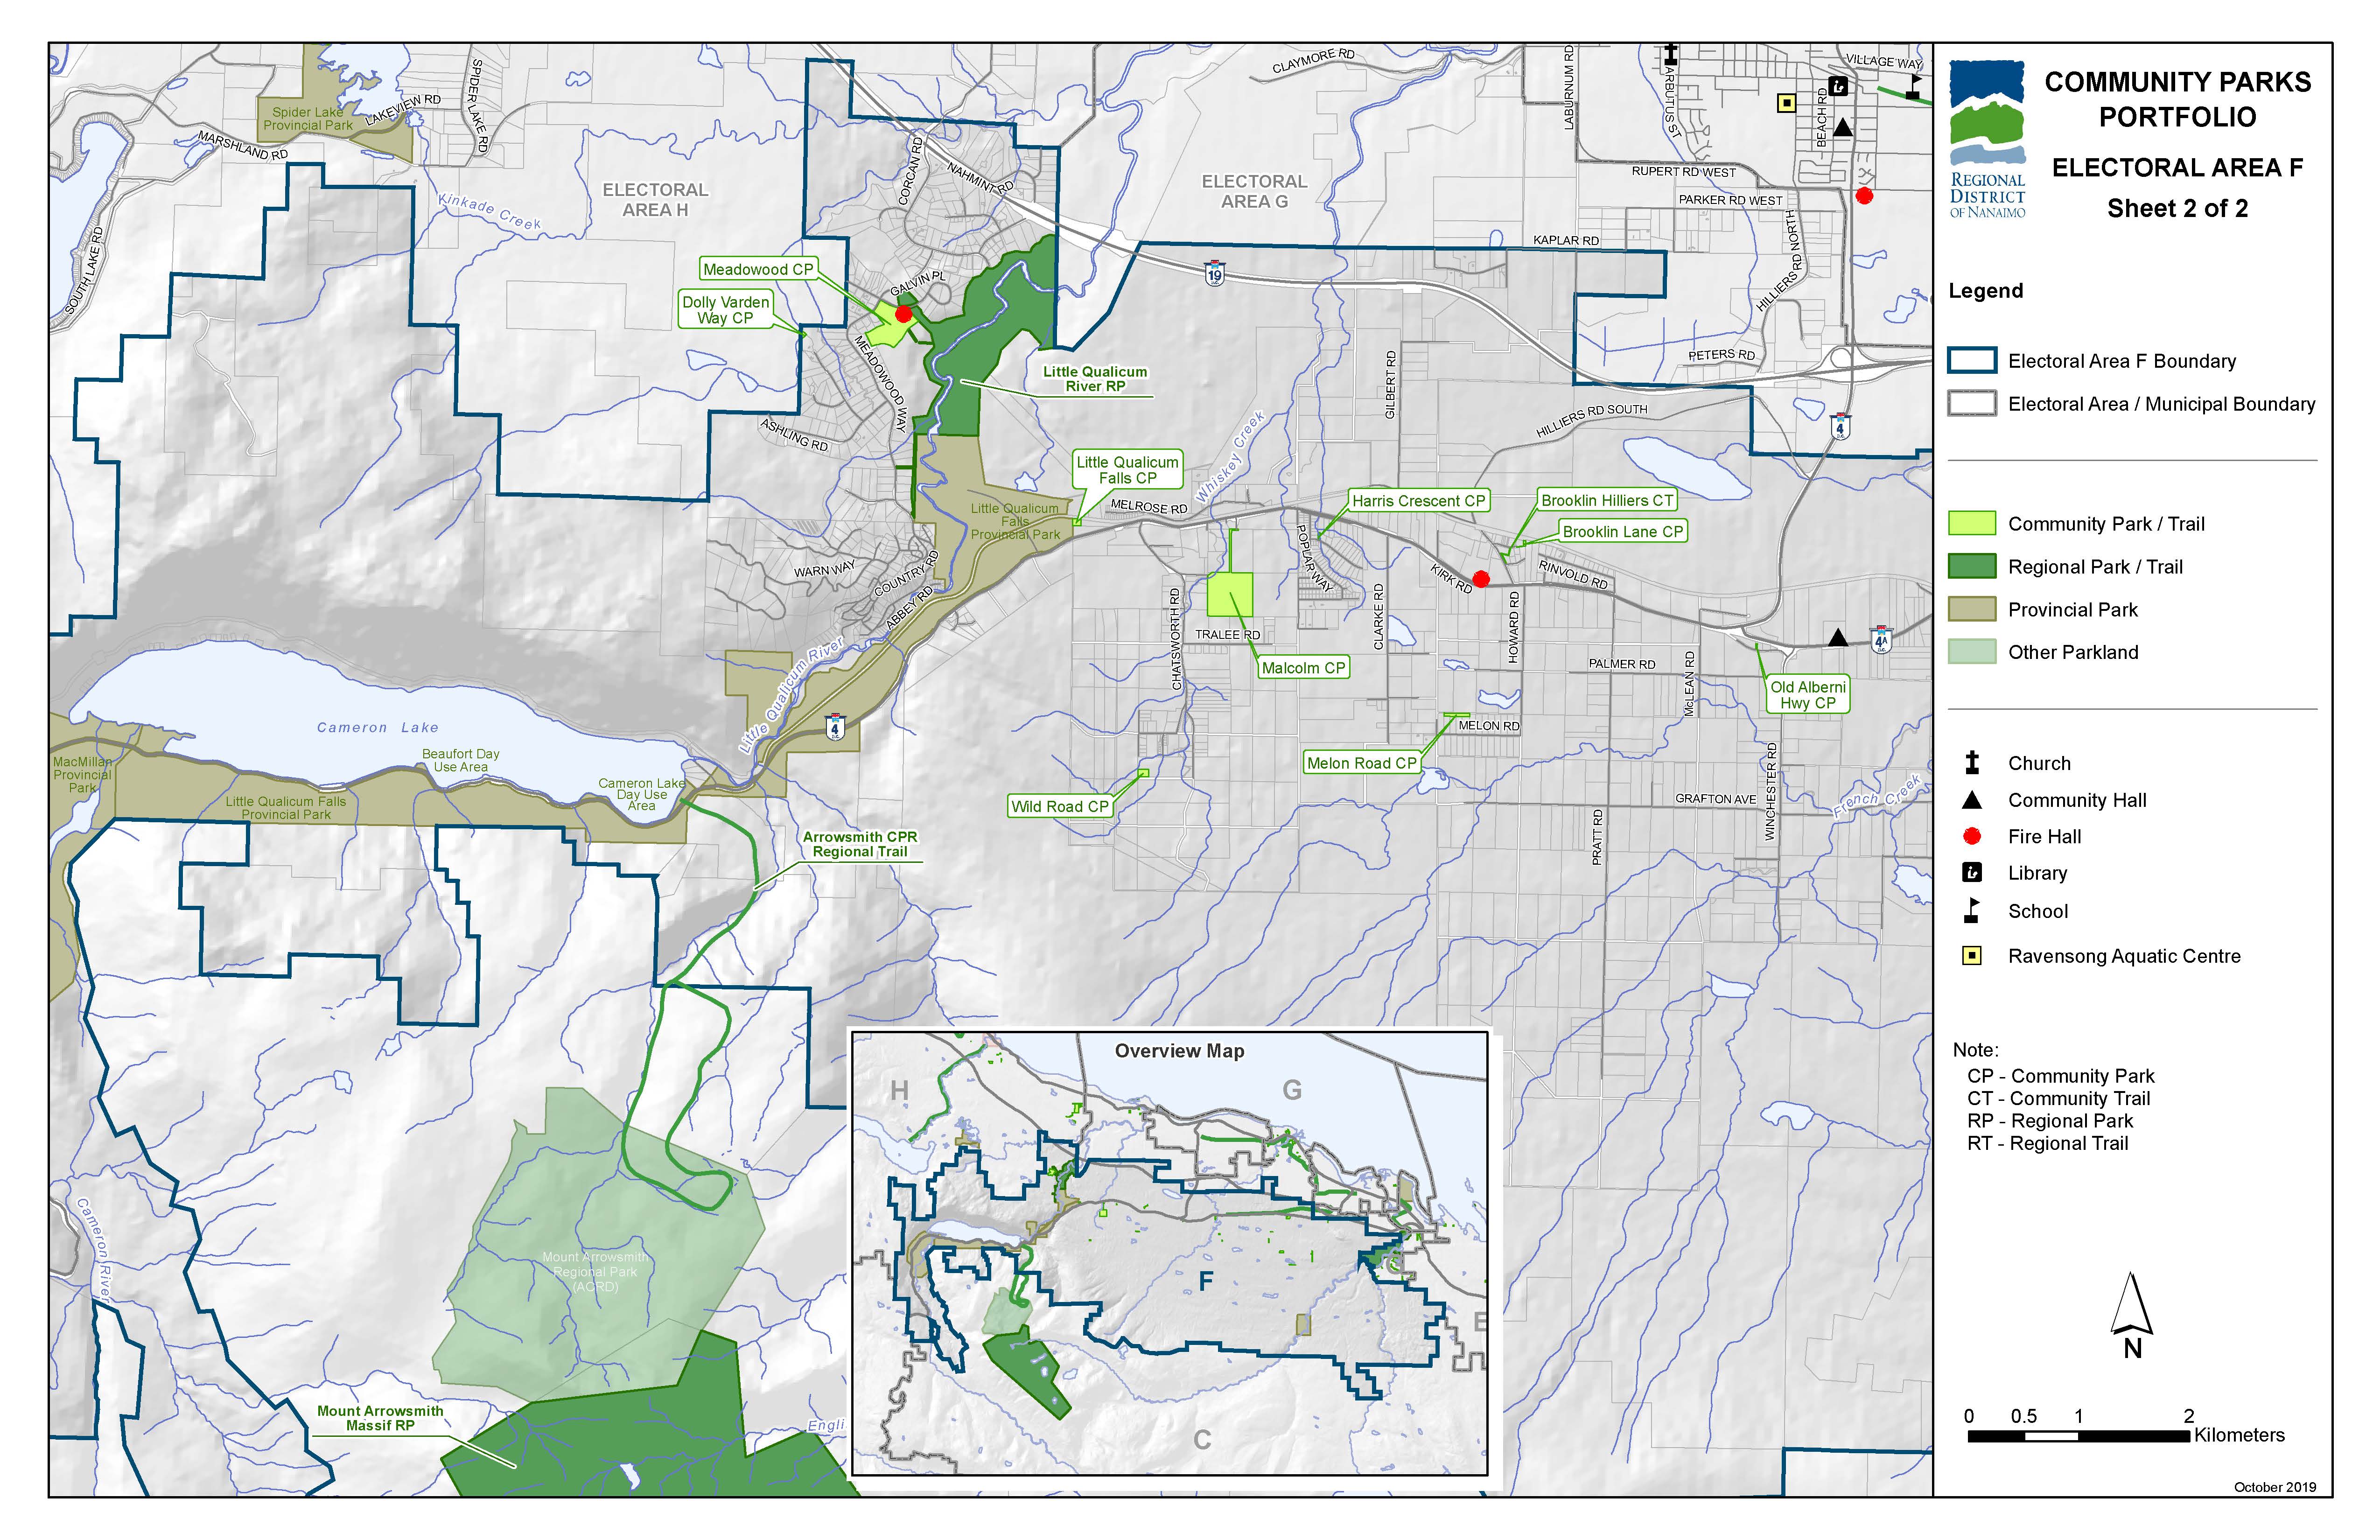 Community Parks and Trails for Area F (West)